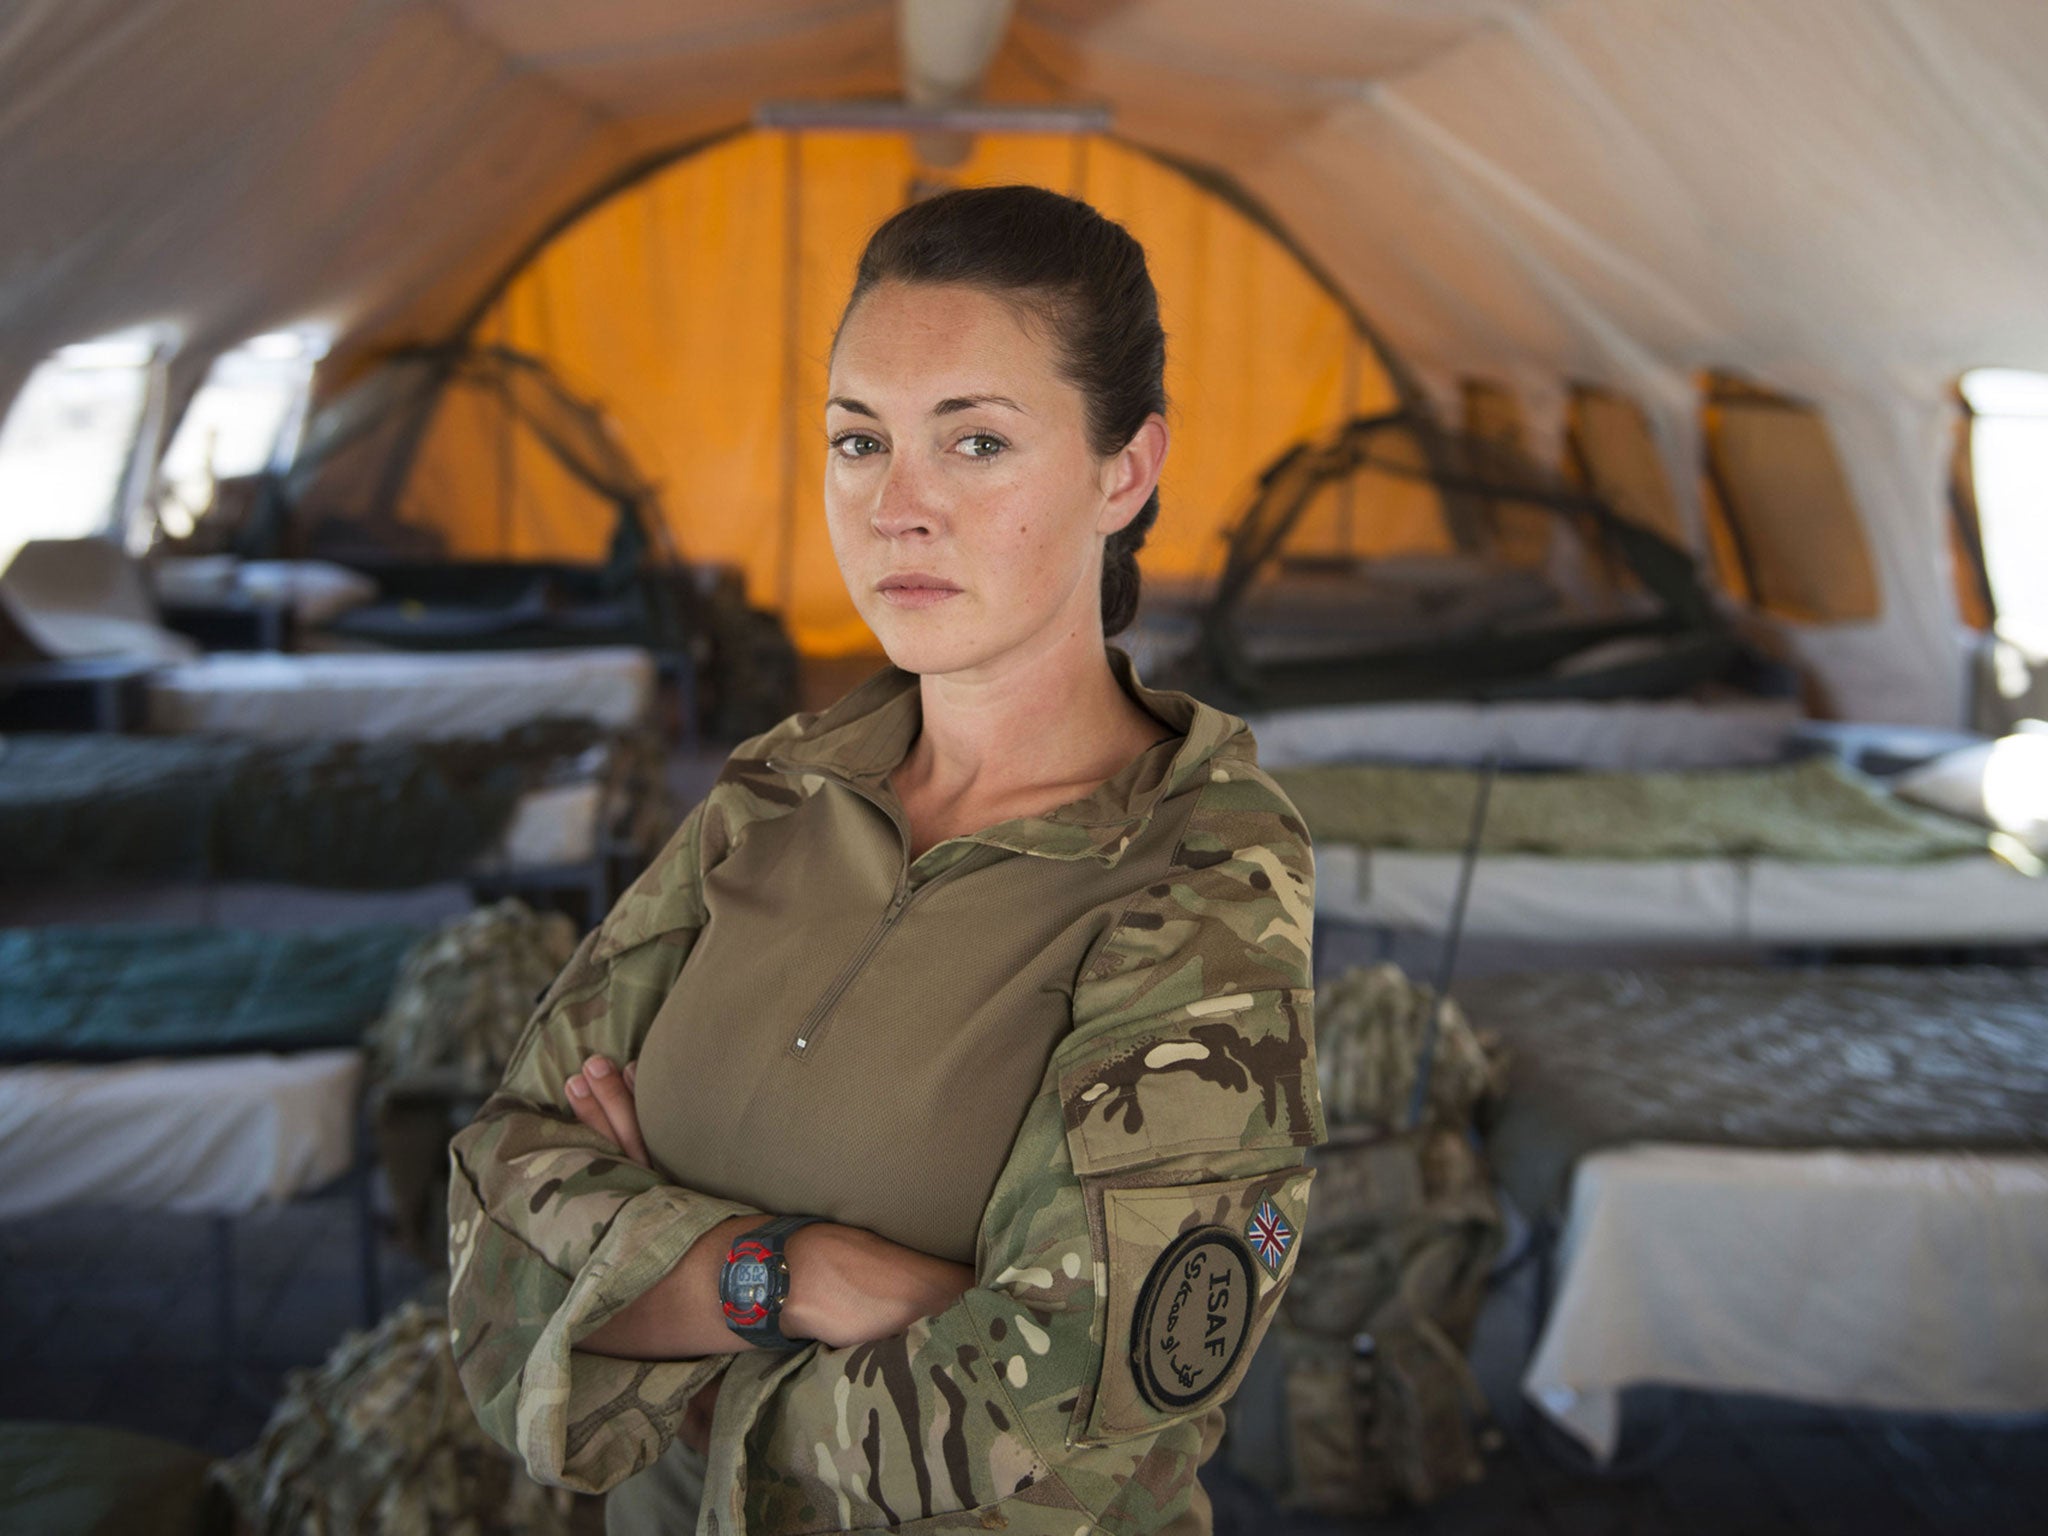 Molly Dawes, played by Lacey Turner